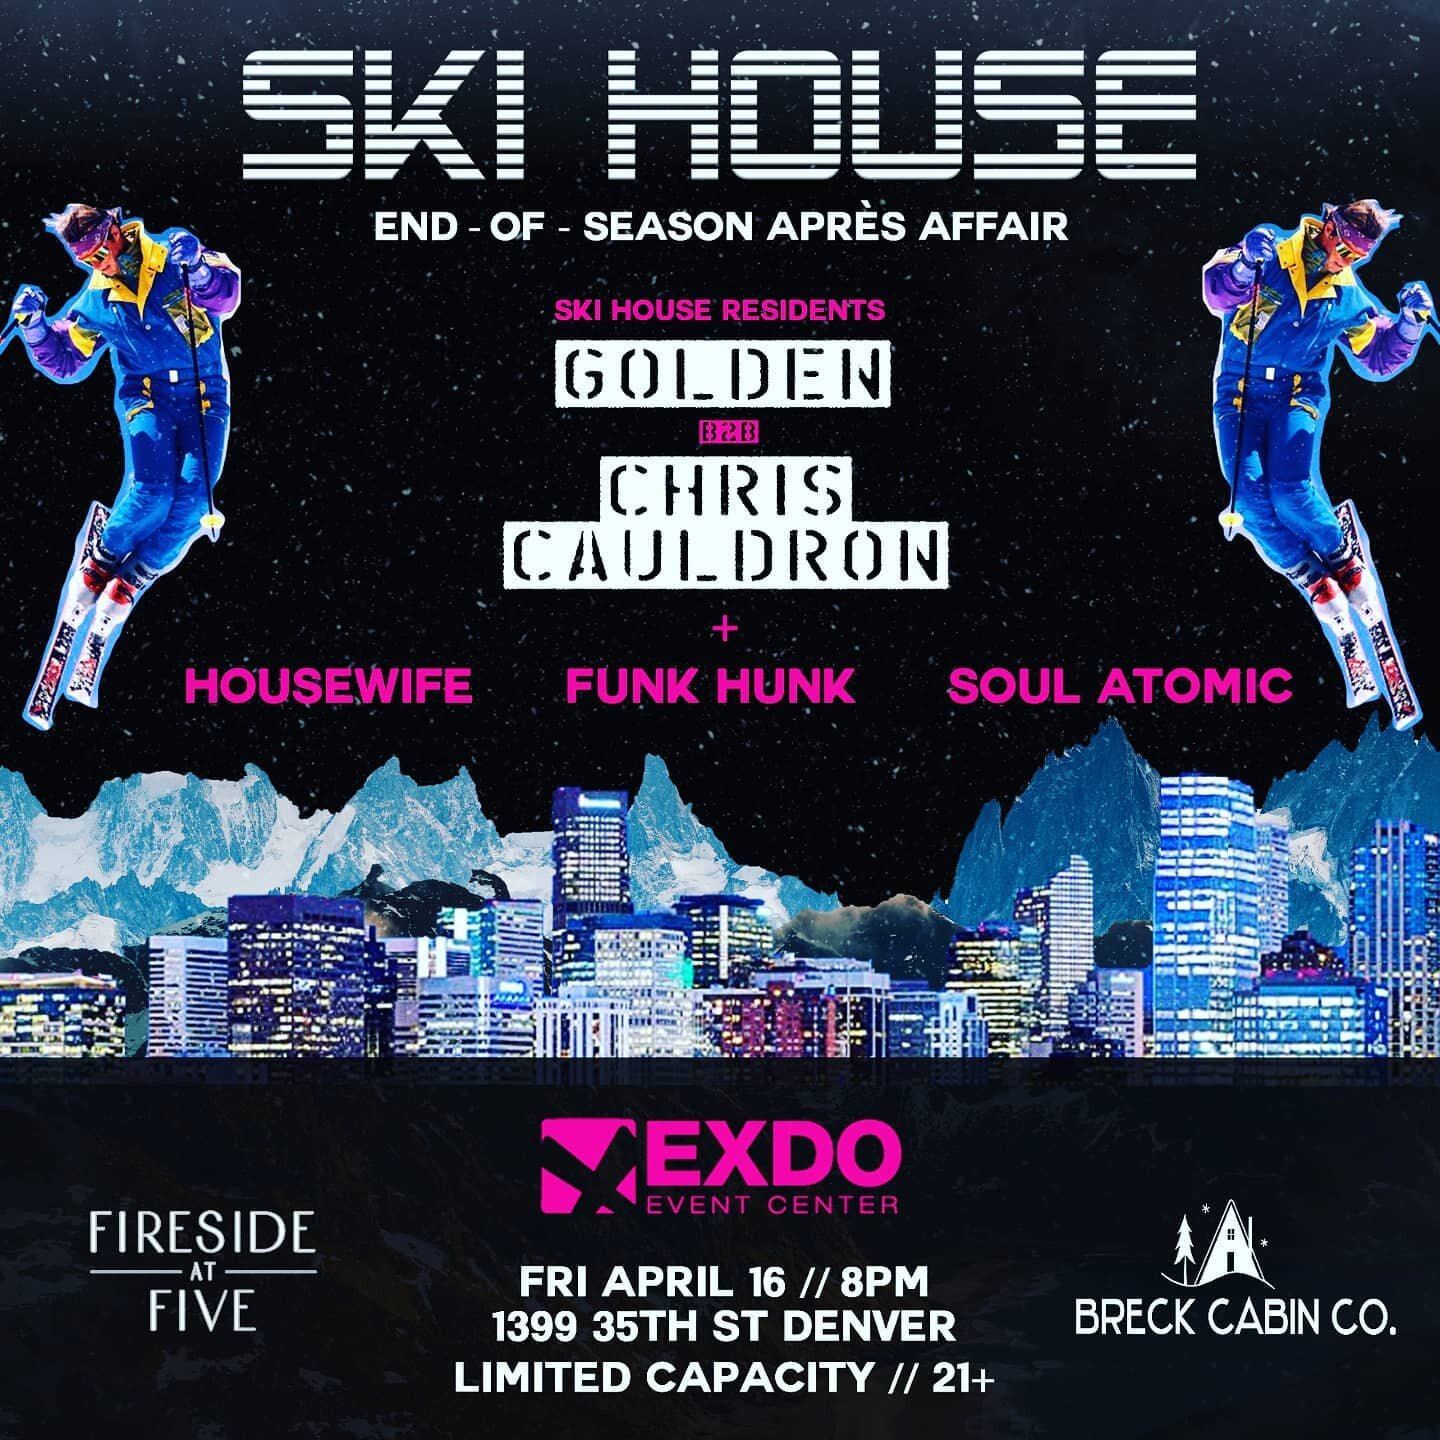 It's been an absolute minute, but we're going to close this season out right.  Bringing our show to Denver on Friday, April 16. We have a stacked lineup of Colorado talent, epic production, and we're even giving away a 3-night stay in Breck thanks to